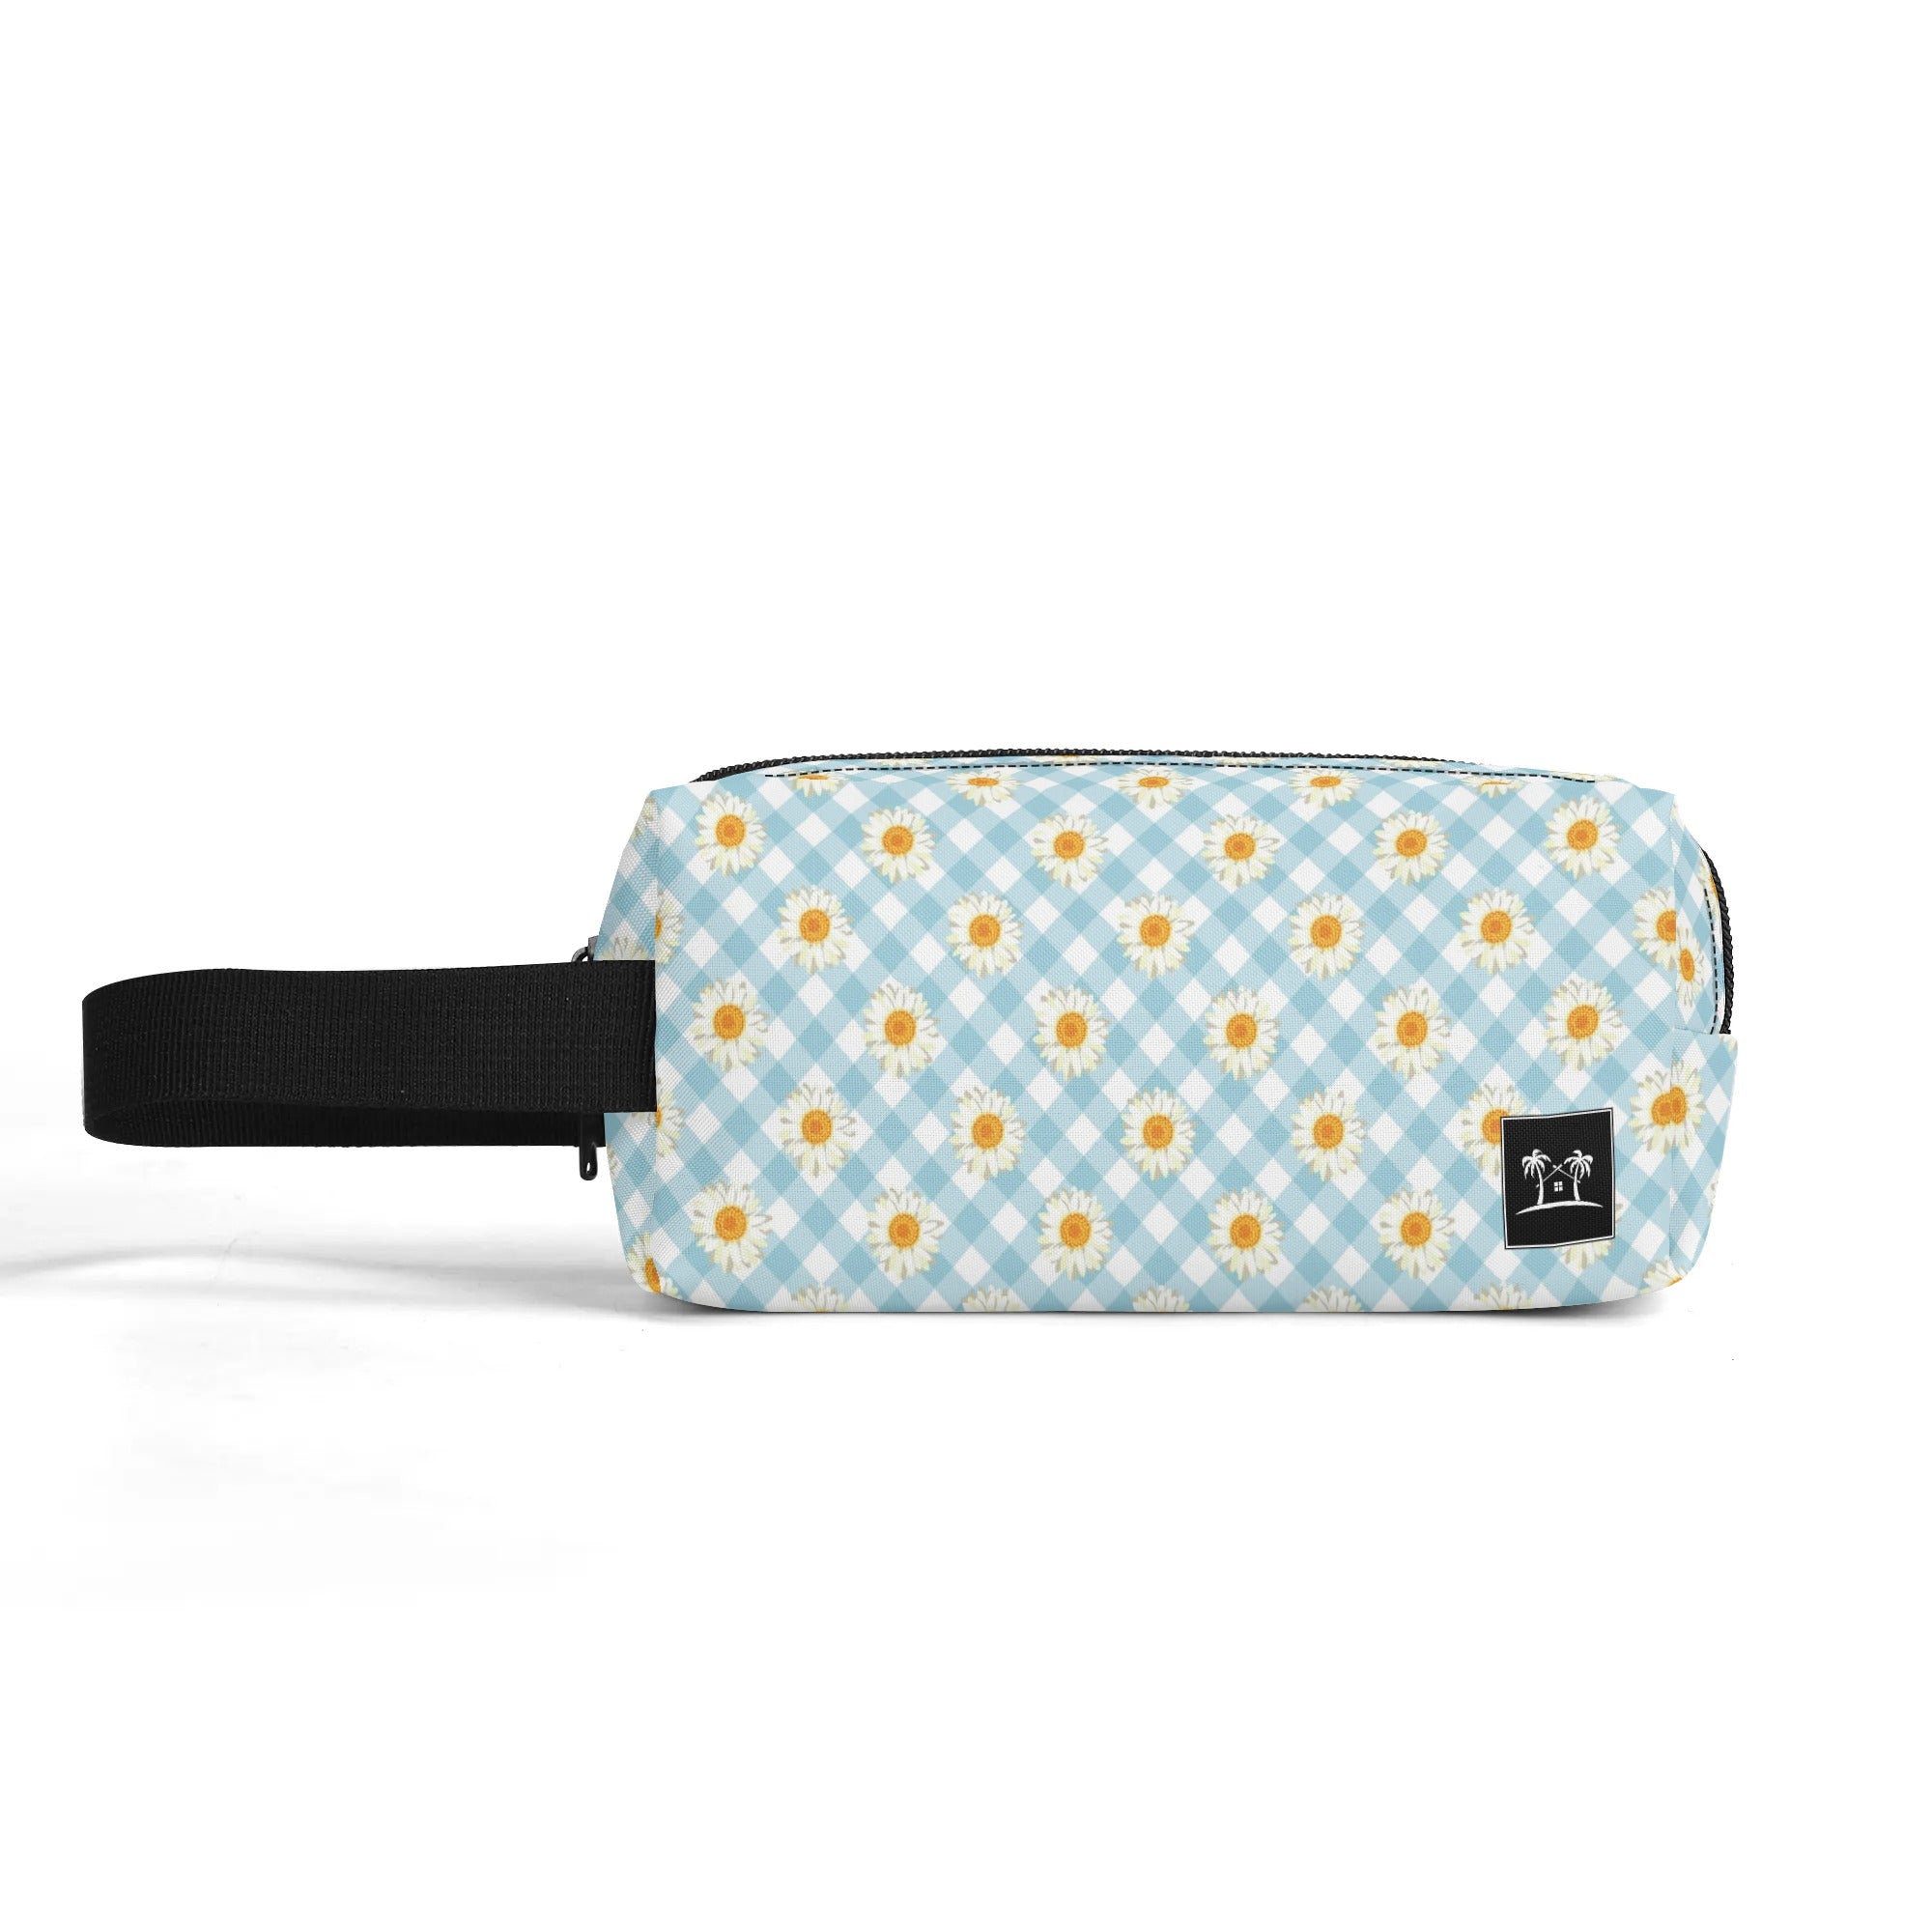 Printed Polyester Wristlet Purse - Blue Gingham Daisies